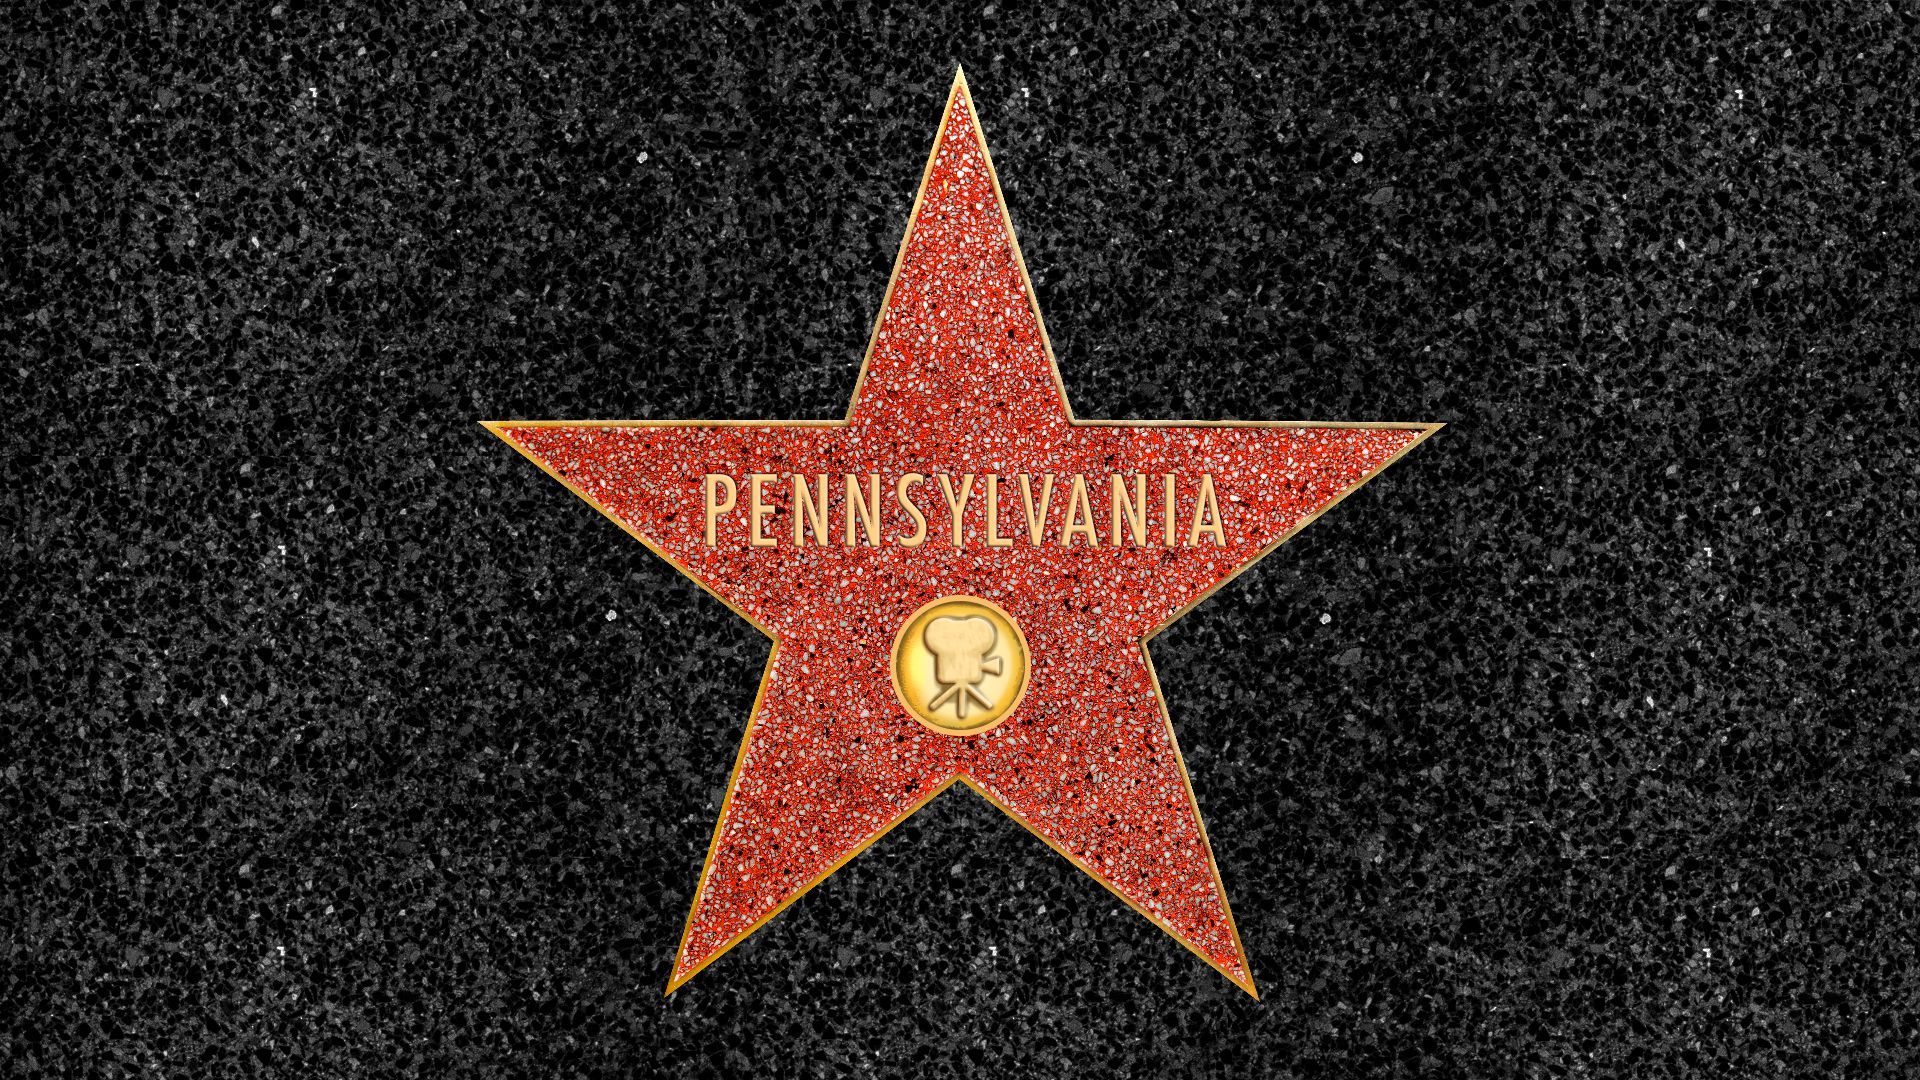 Illustration of a Hollywood Walk of Fame star labelled "Pennsylvania".